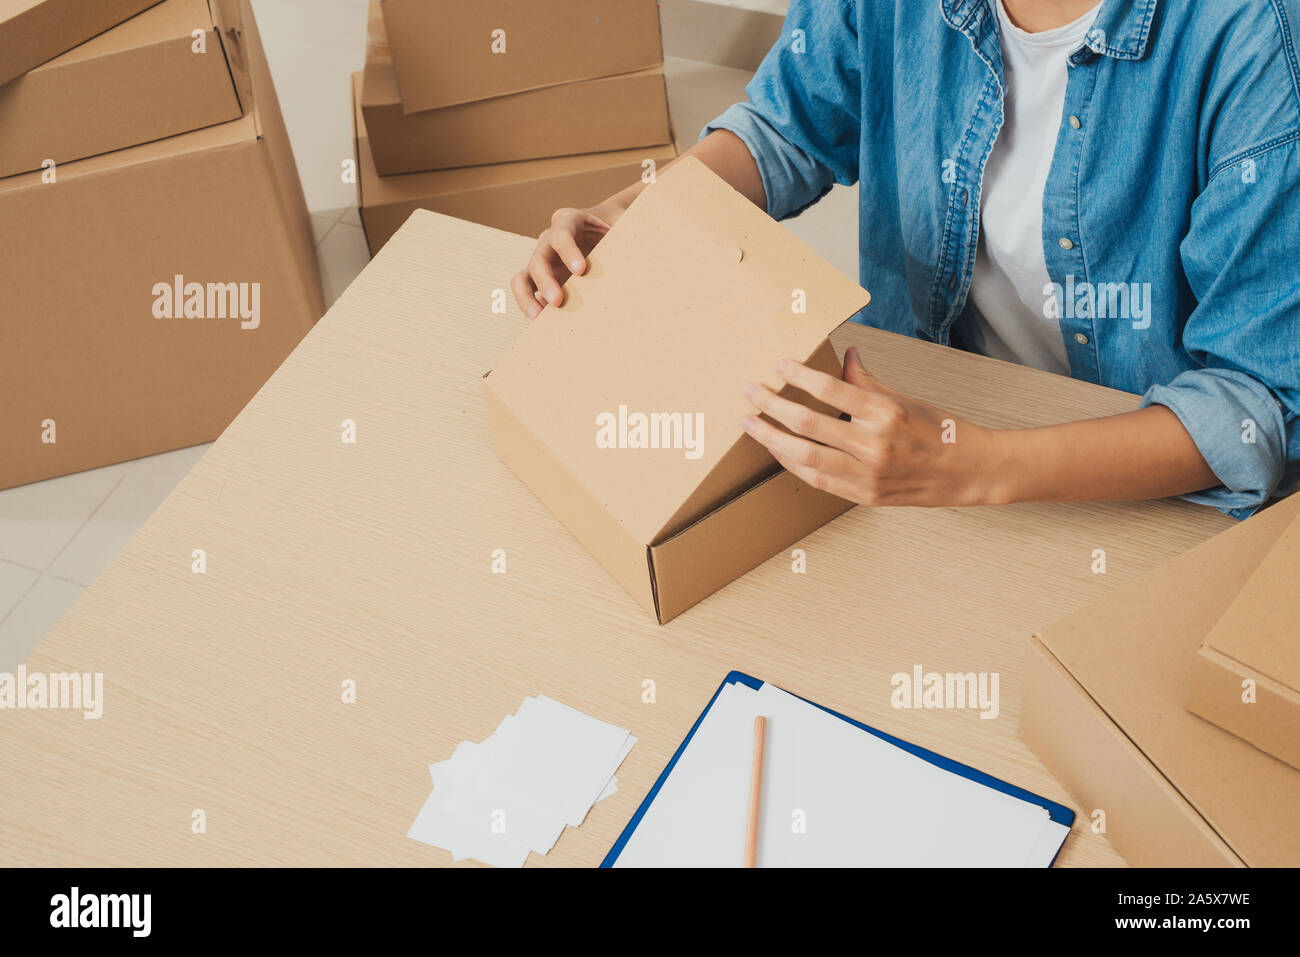 Young startup entrepreneur small business owner working at home, packaging and delivery situation. Stock Photo